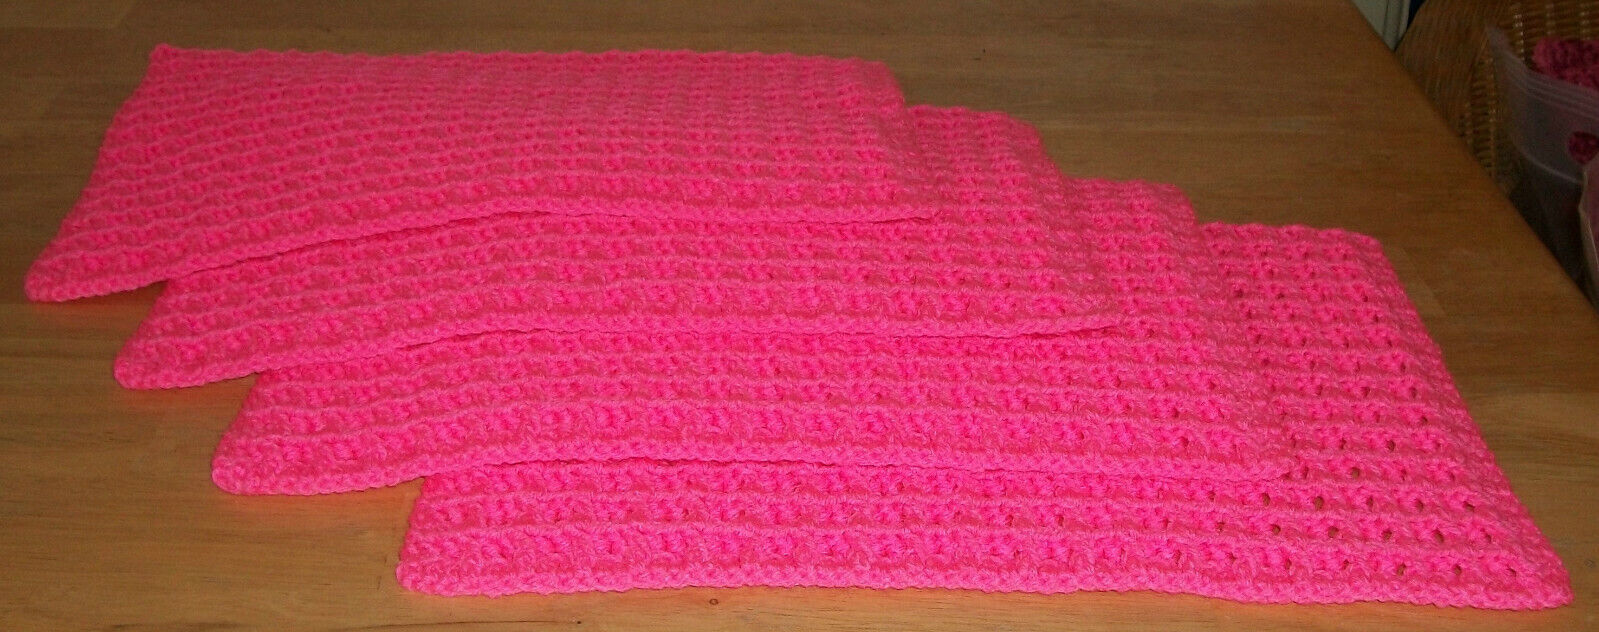 New 4Pc Set Uniq Handmade Crochet 12x16 Rectangle Table Placemats Pretty In Pink